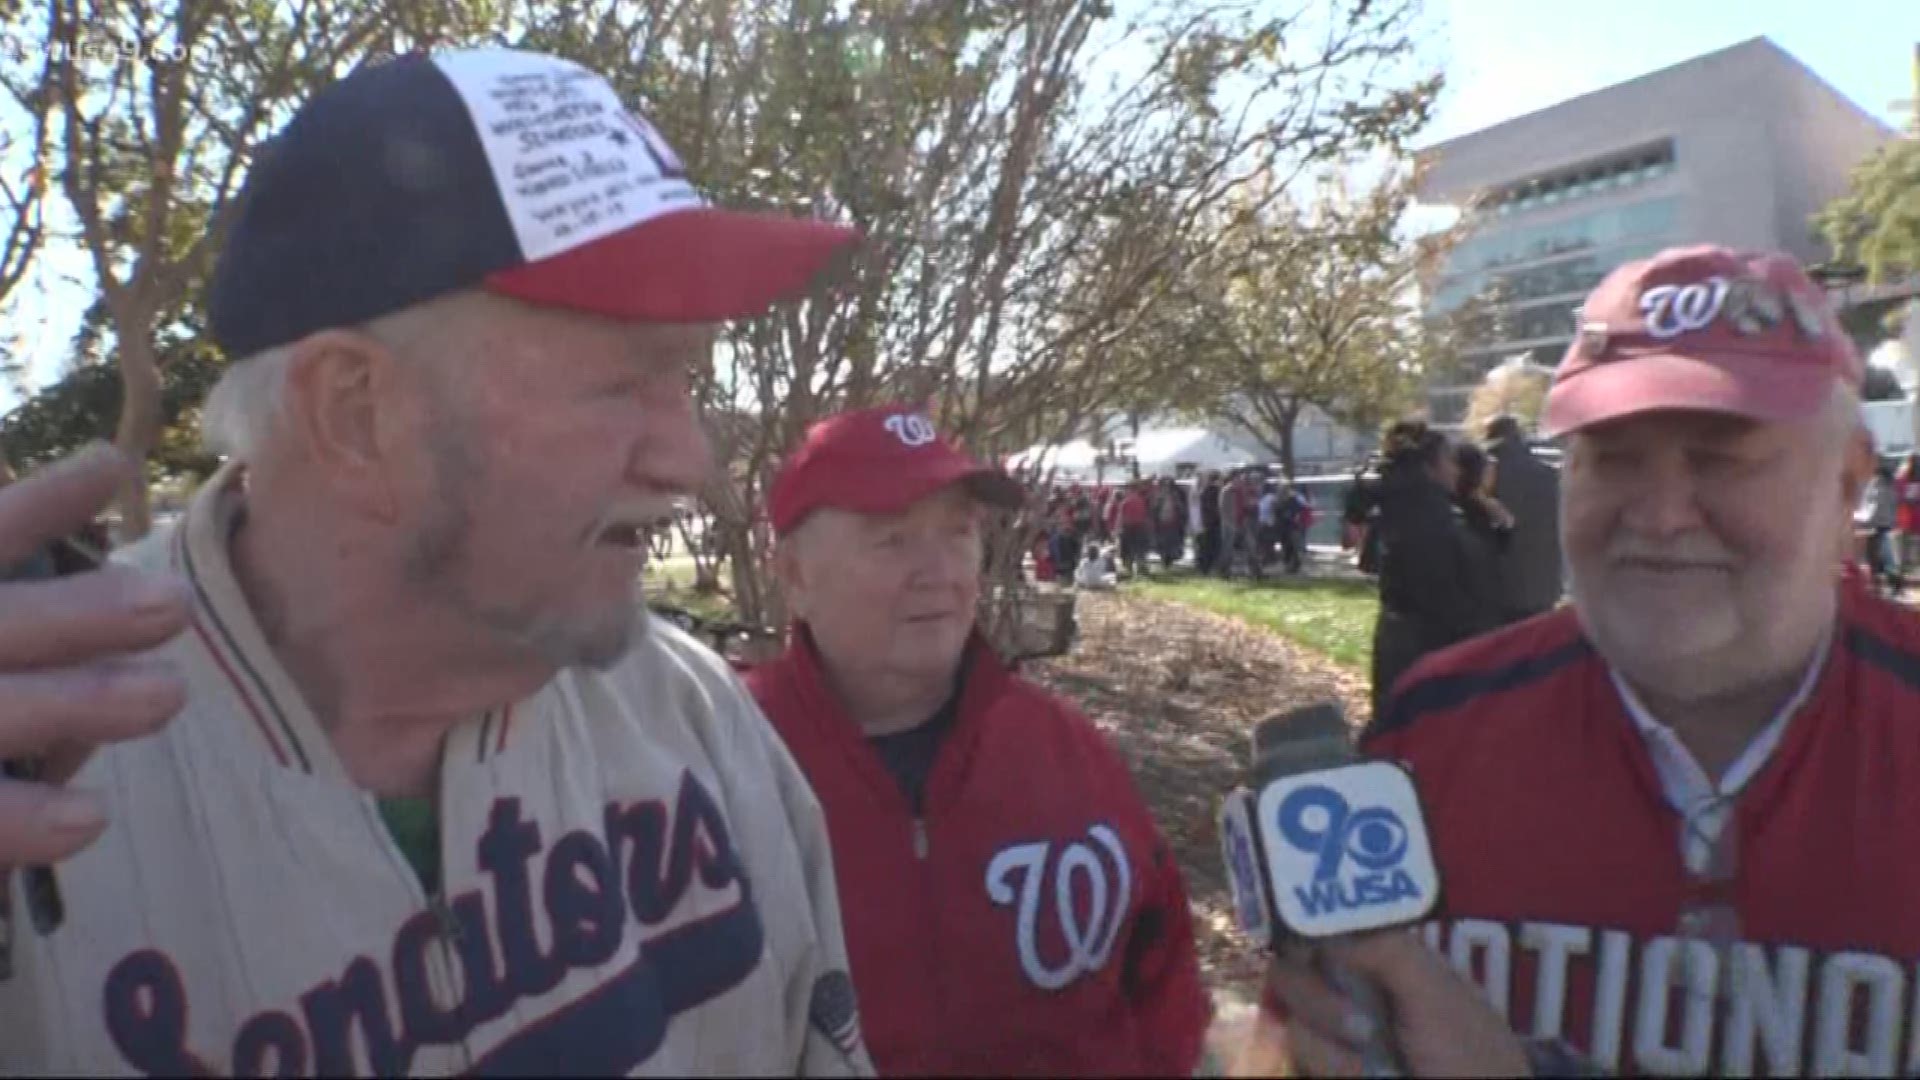 Brothers, Niel and Wayne Valis waited 70 years for this World Series win. They predict the Nationals will win again next year!